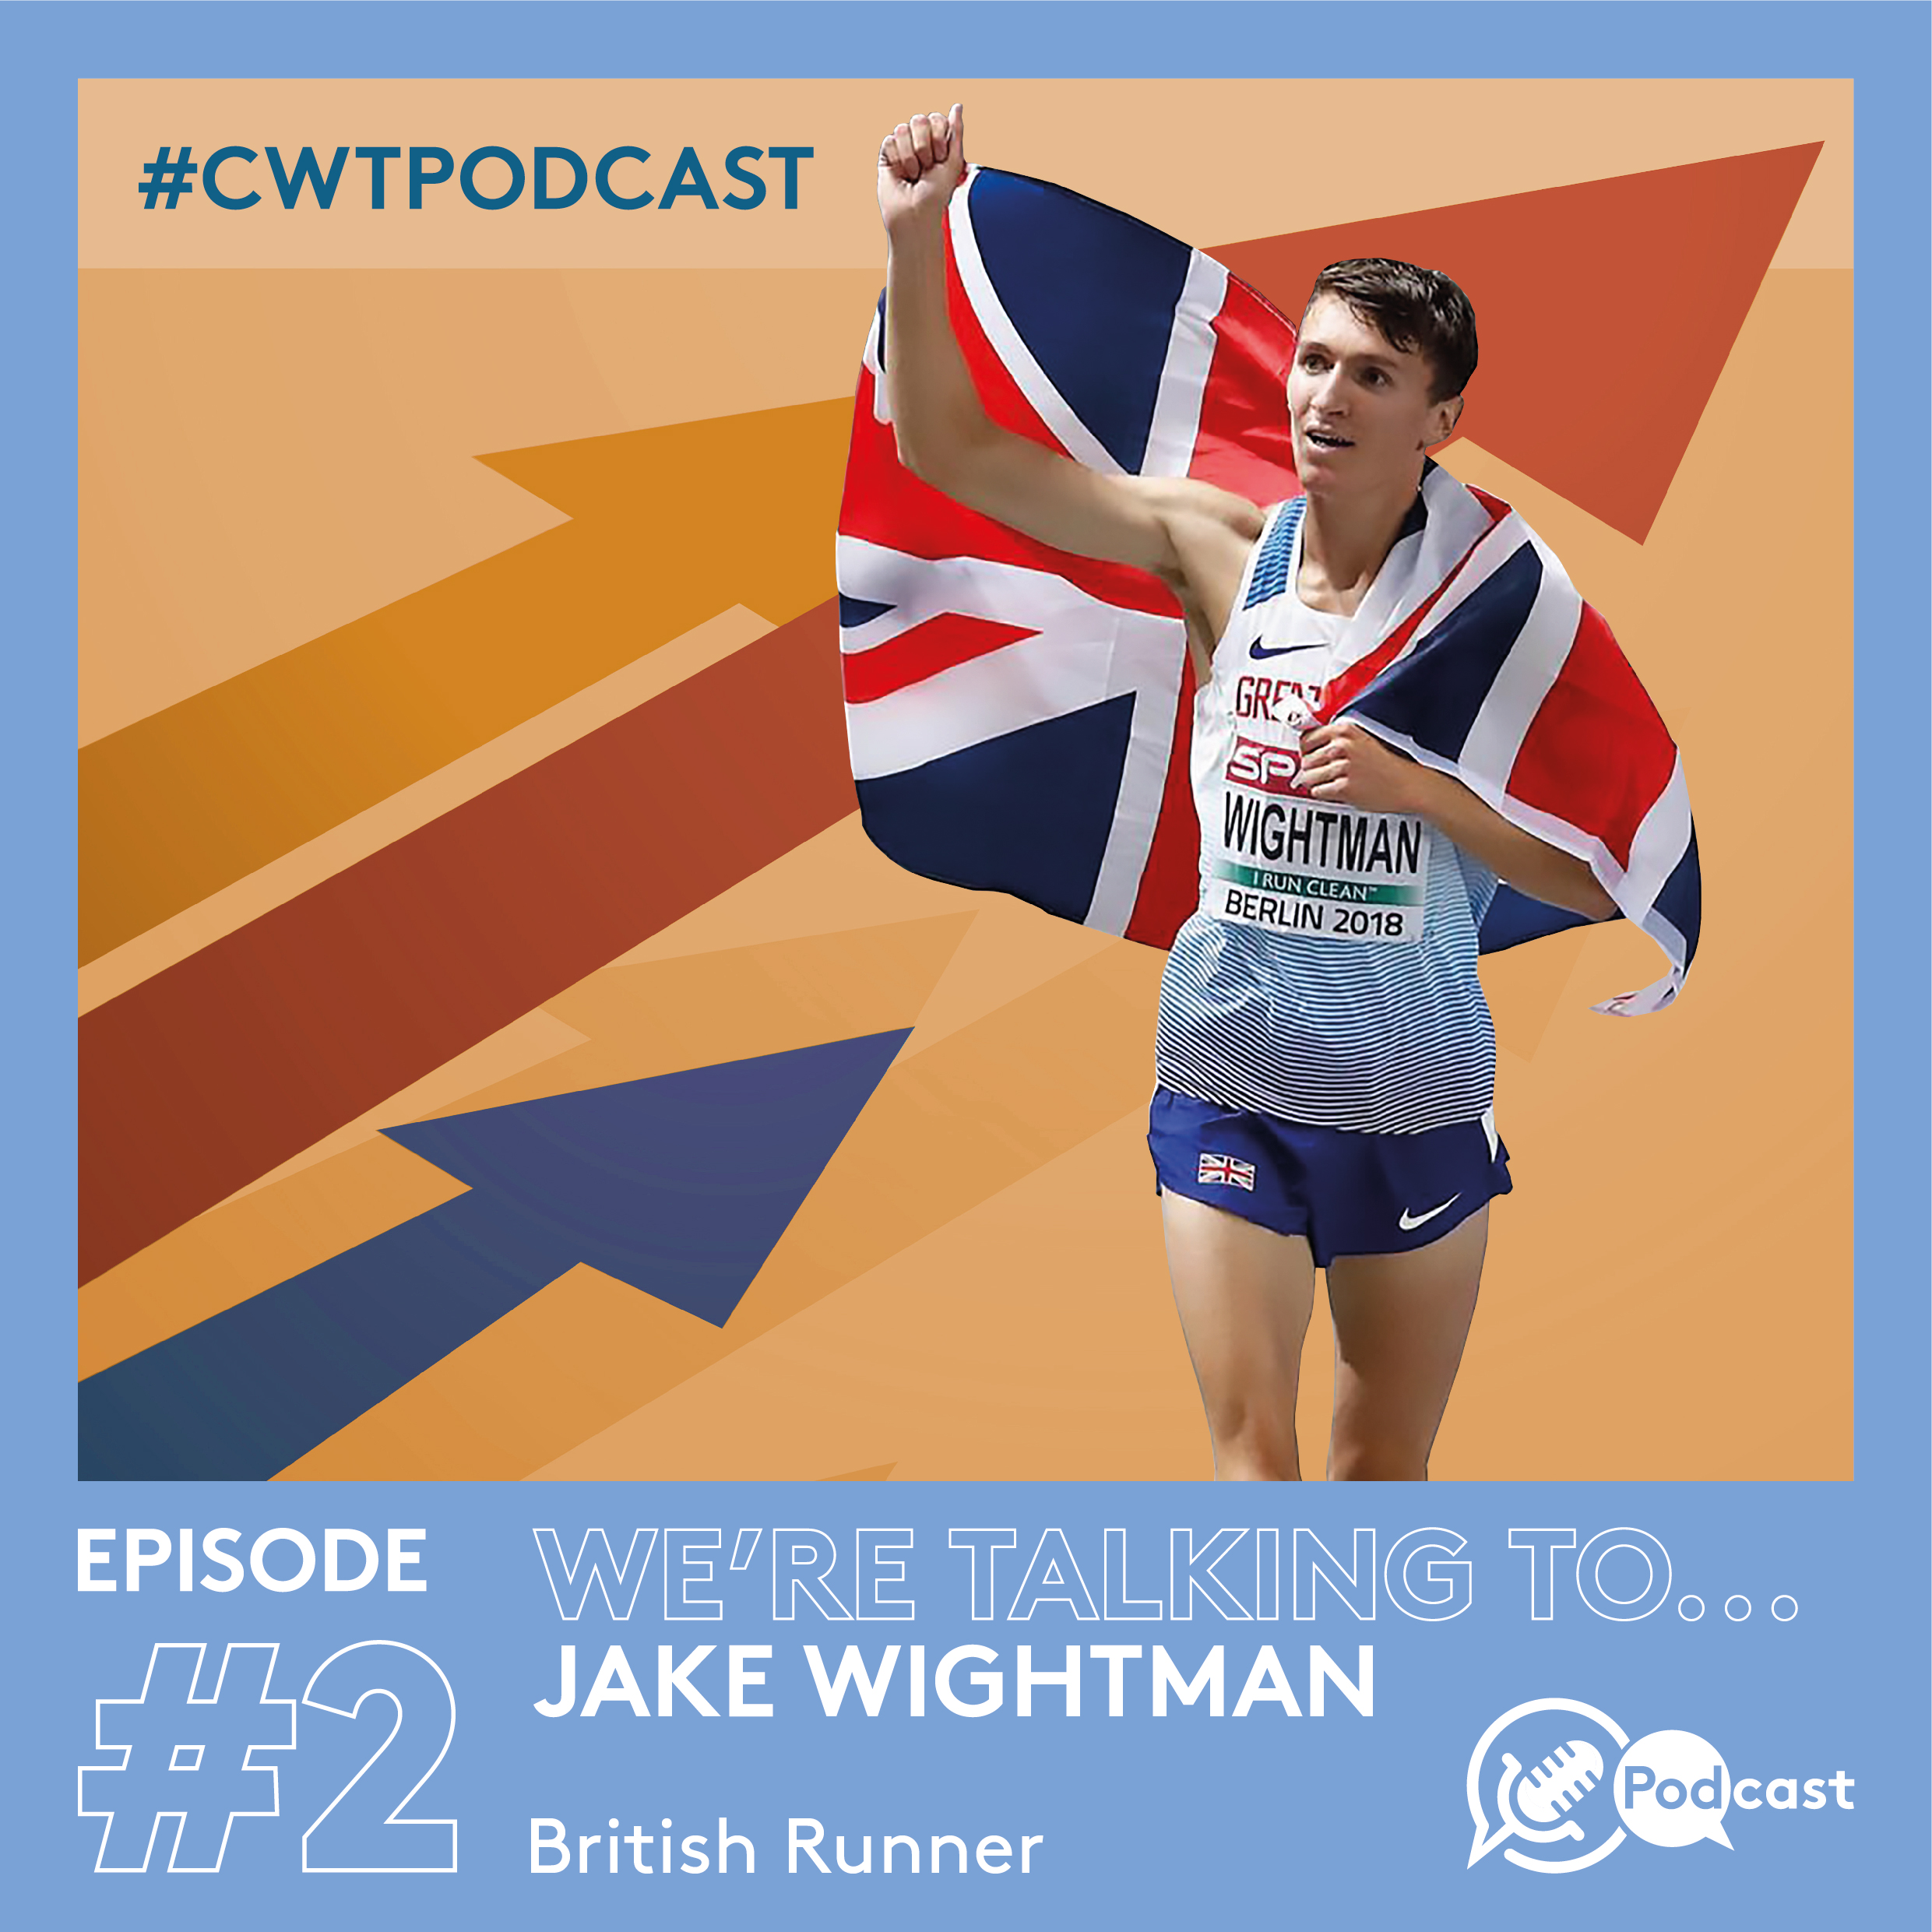 Image of Jake Wightman running on the podcast episode artwork.